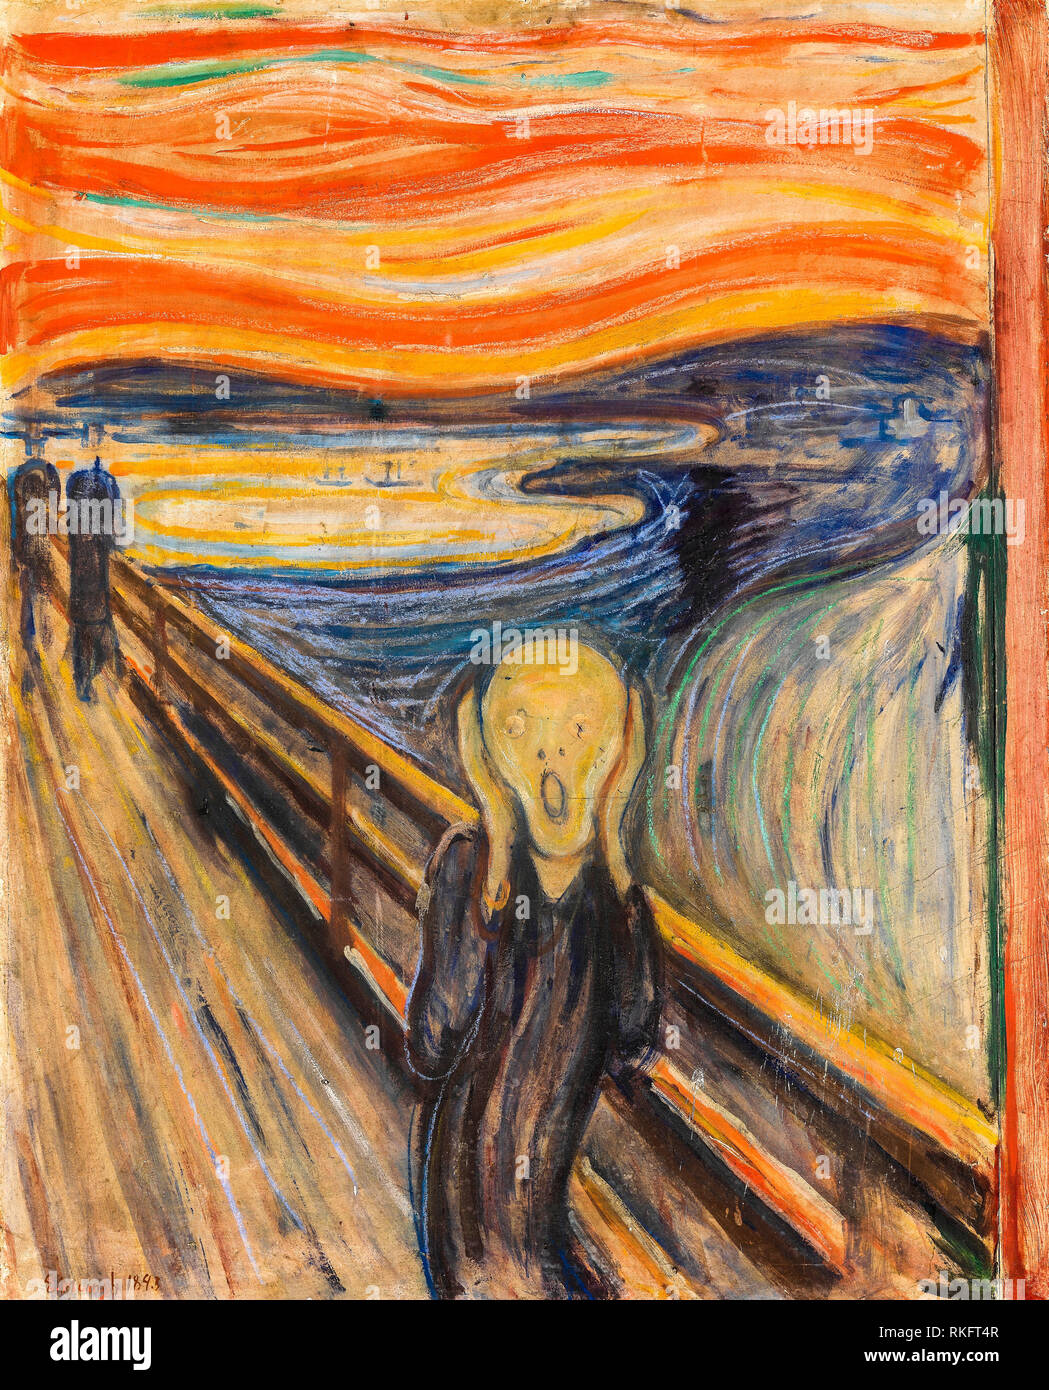 I Finally Found Out !!-scream-edvard-munch-mixed-media-painting-1893-rkft4r-jpg